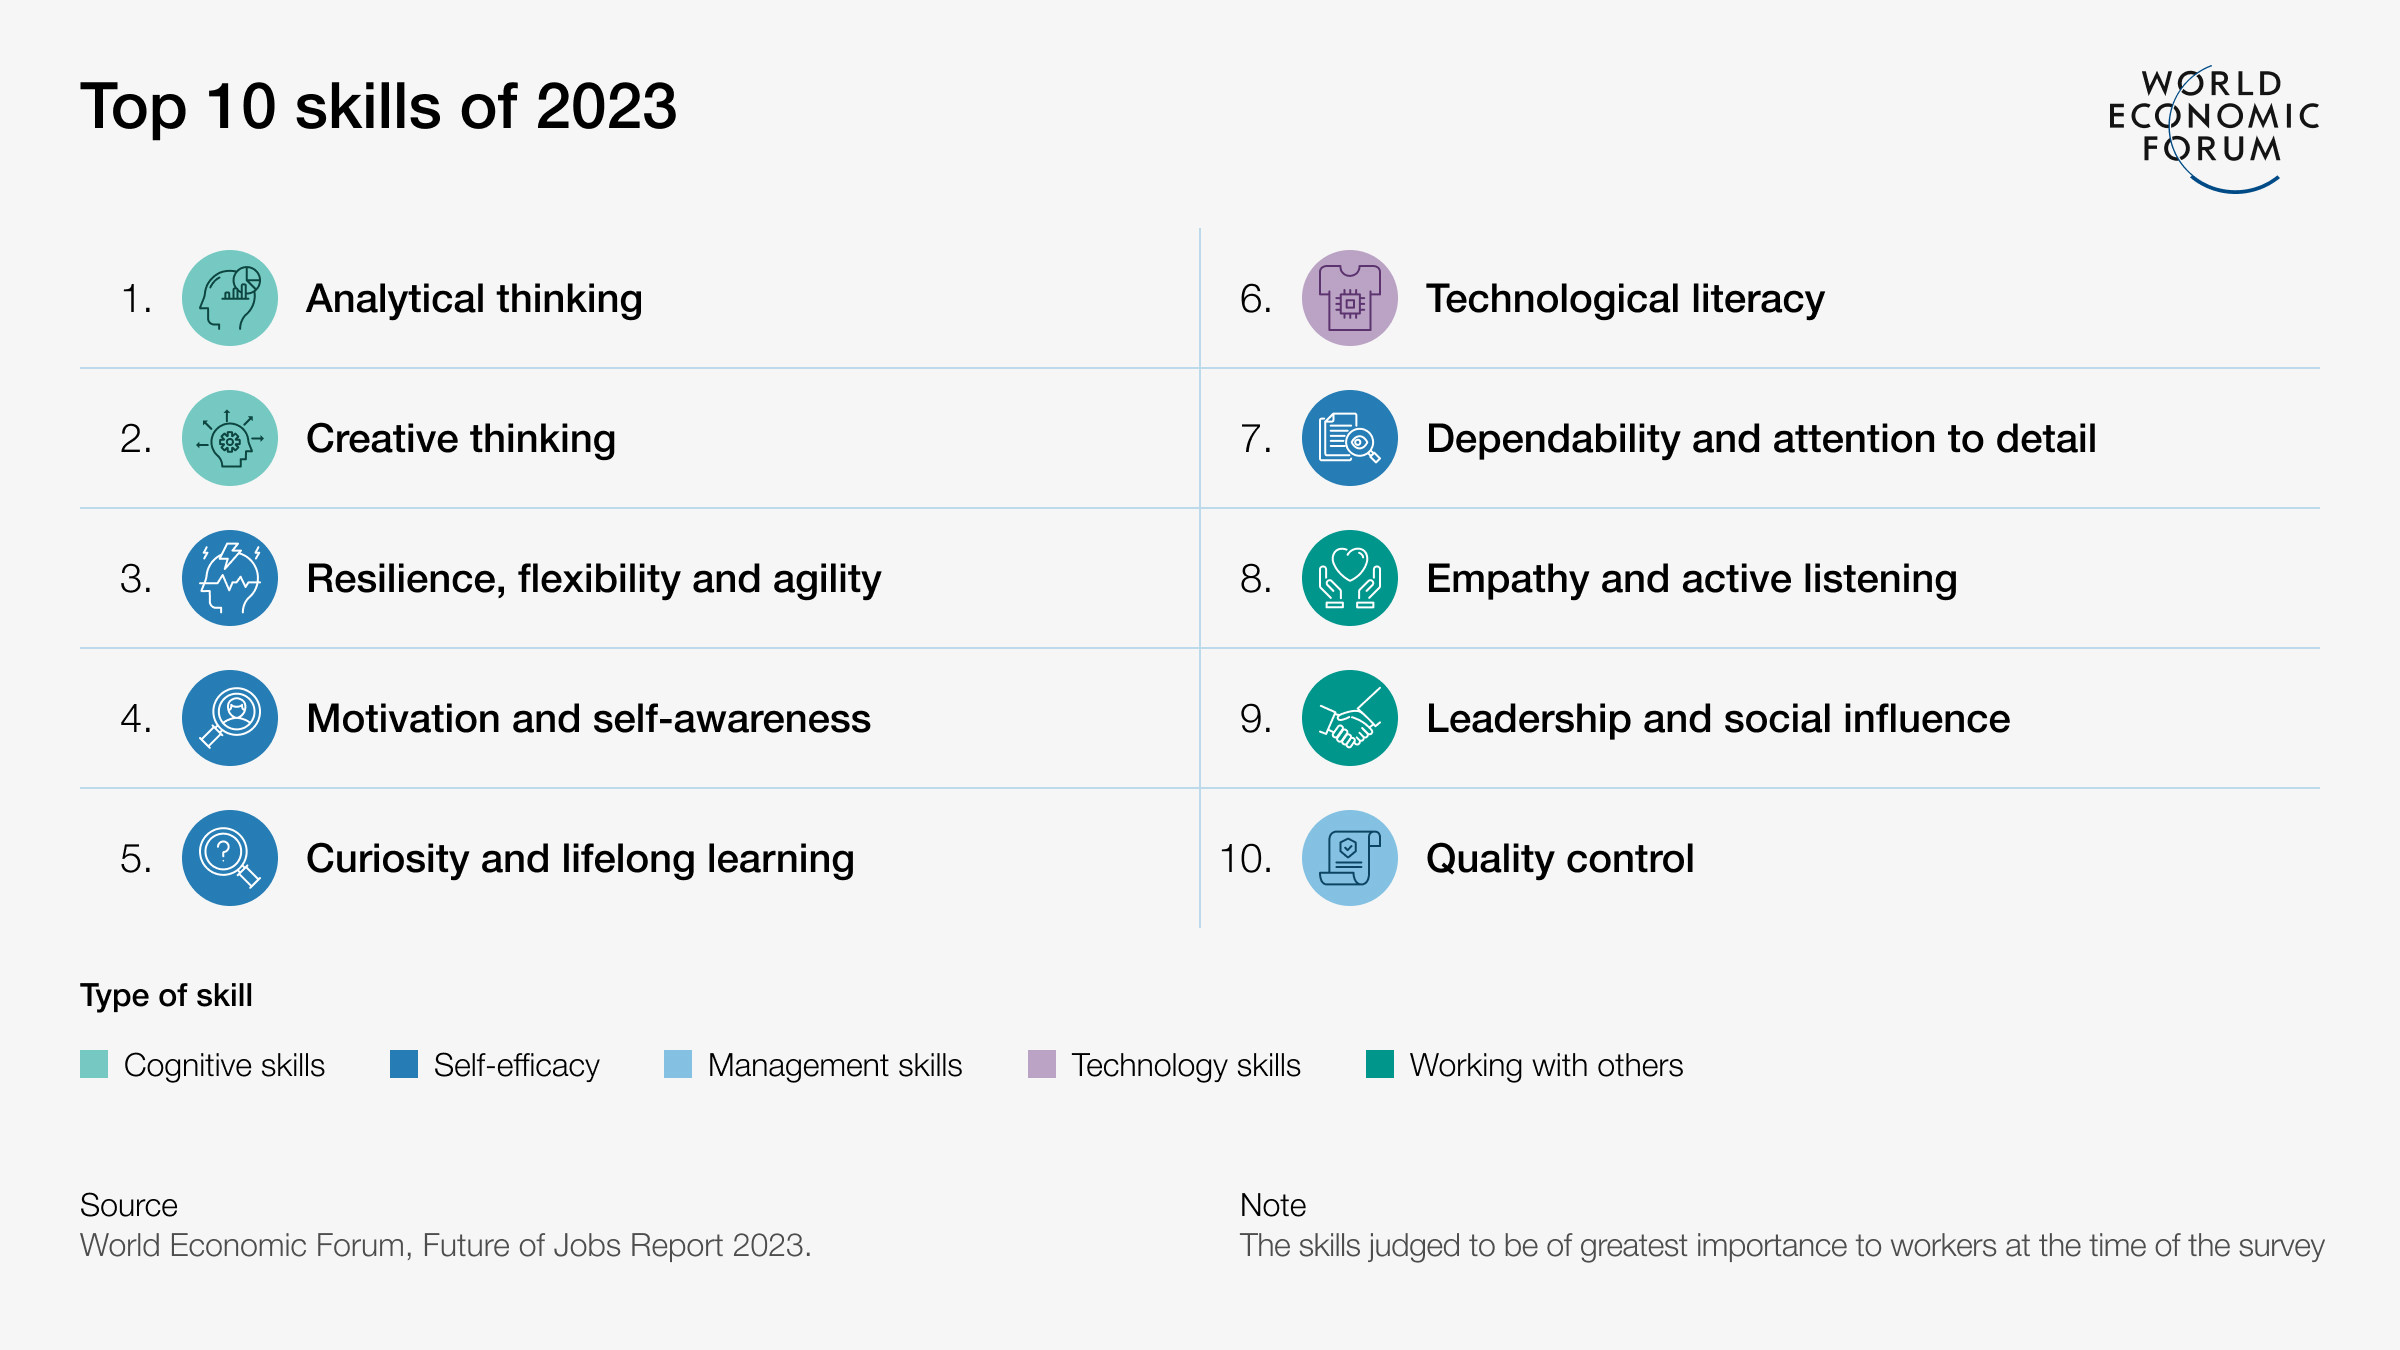 List of the top 10 skills of 2023 by the World Economic Forum